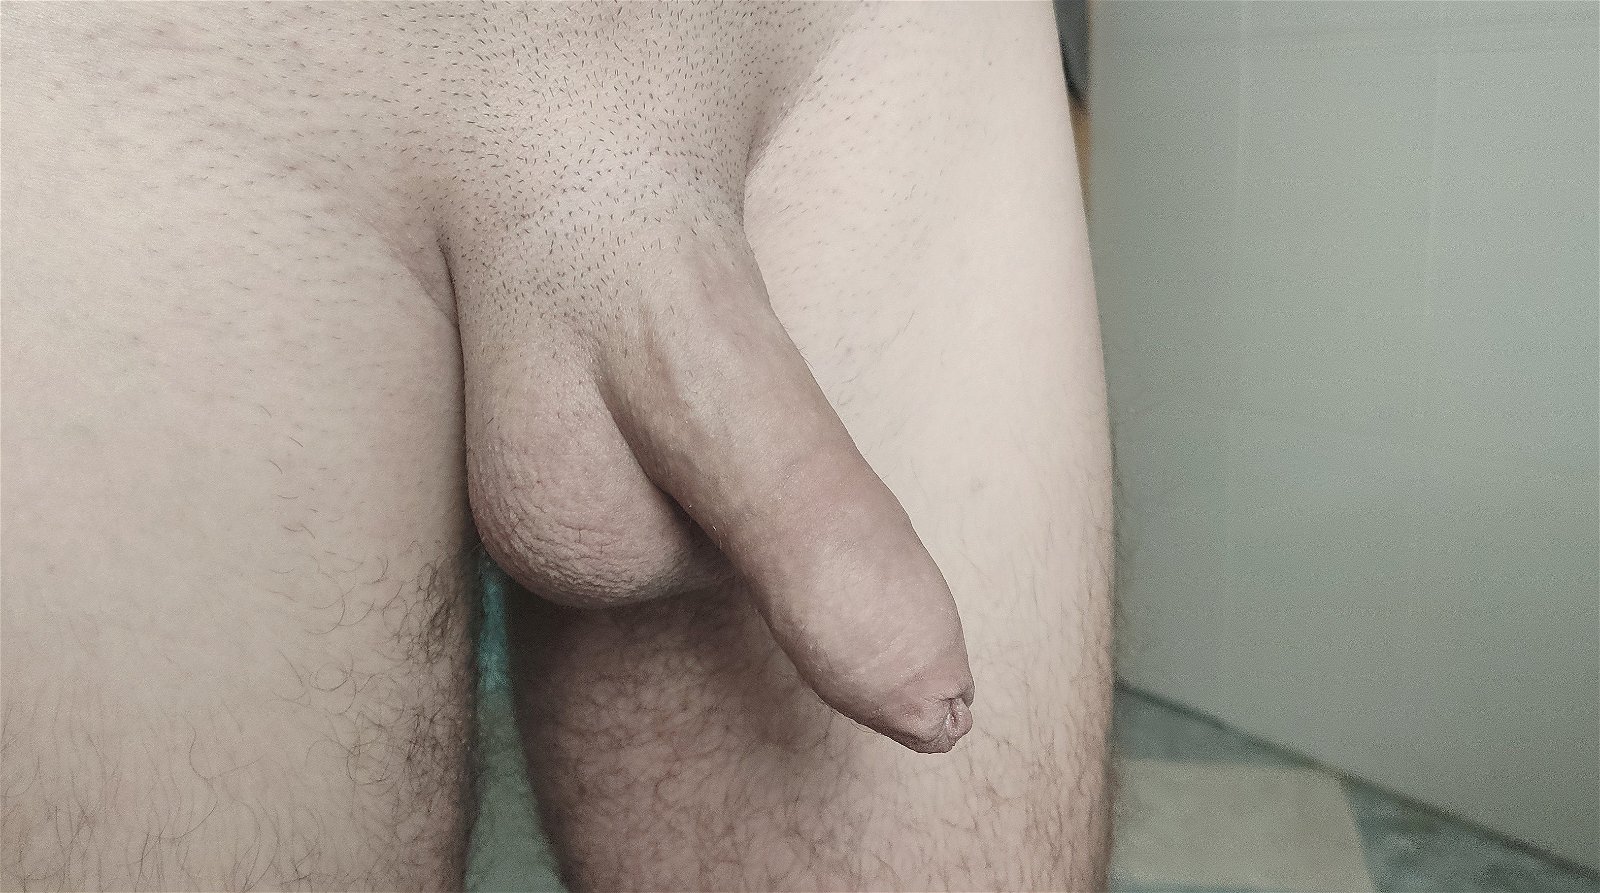 Photo by Alvaromadrid with the username @Alvaromadrid,  December 3, 2021 at 9:29 AM. The post is about the topic Gay Shaved Cock and the text says '#dick #cock #polla #pene #cum #paja #blowjog #boy #chico #bi #bisex #bisexual #gay #handjob #madrid #spain'